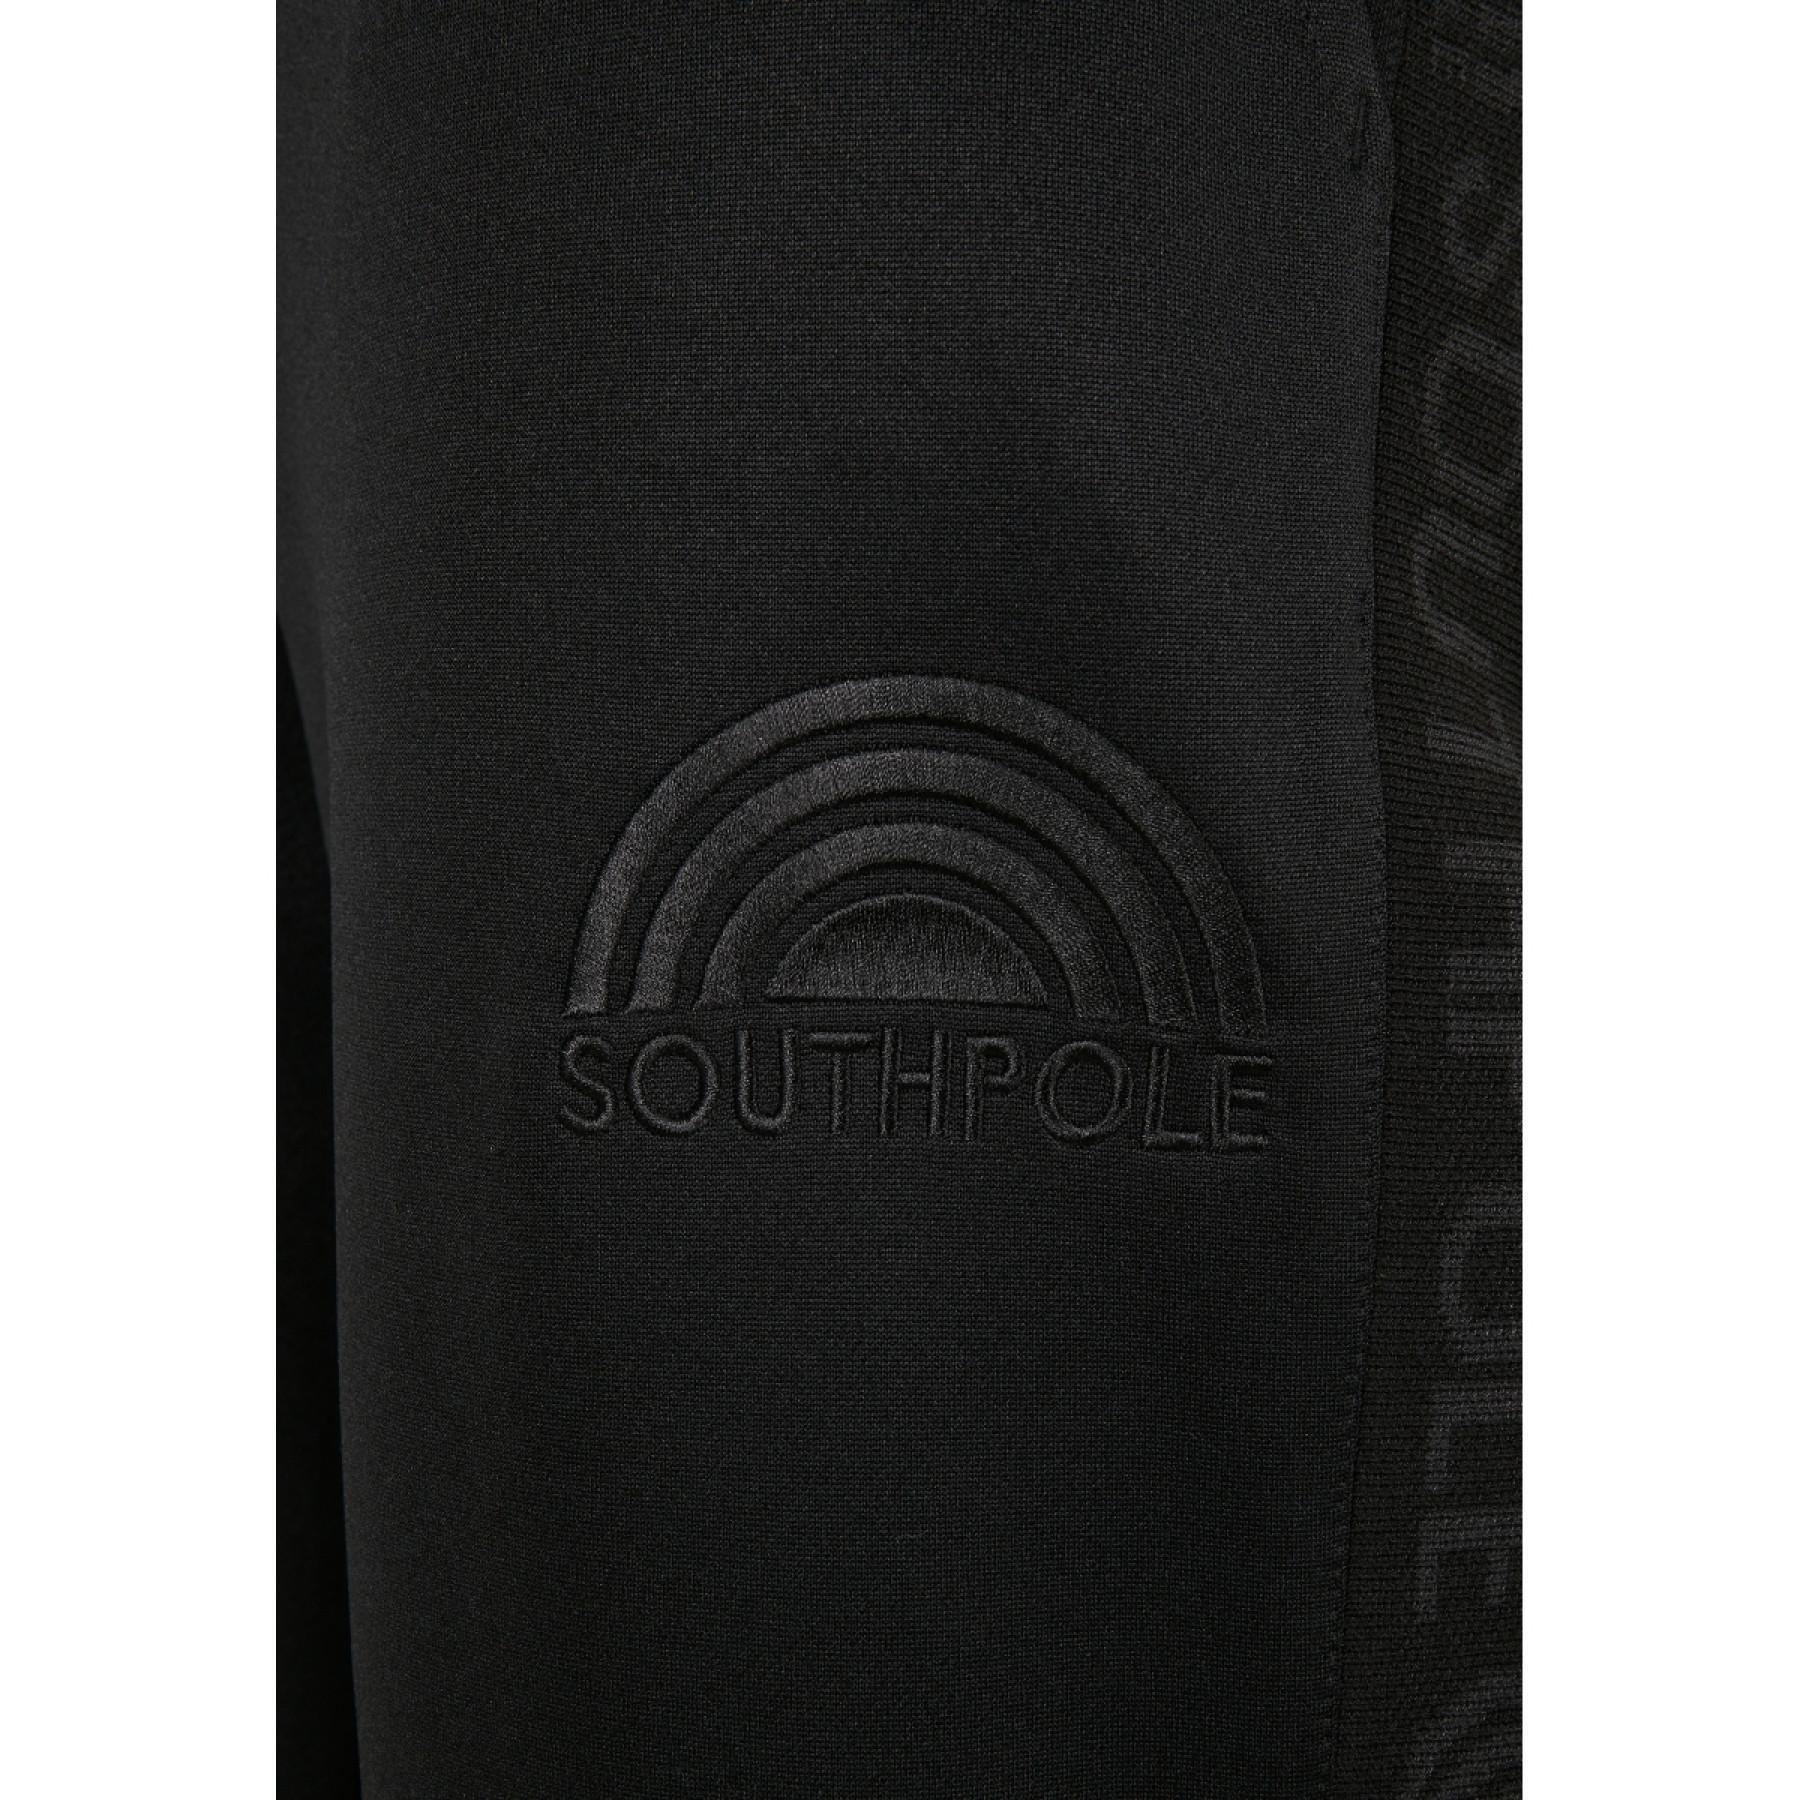 Calças Southpole tricot with tape